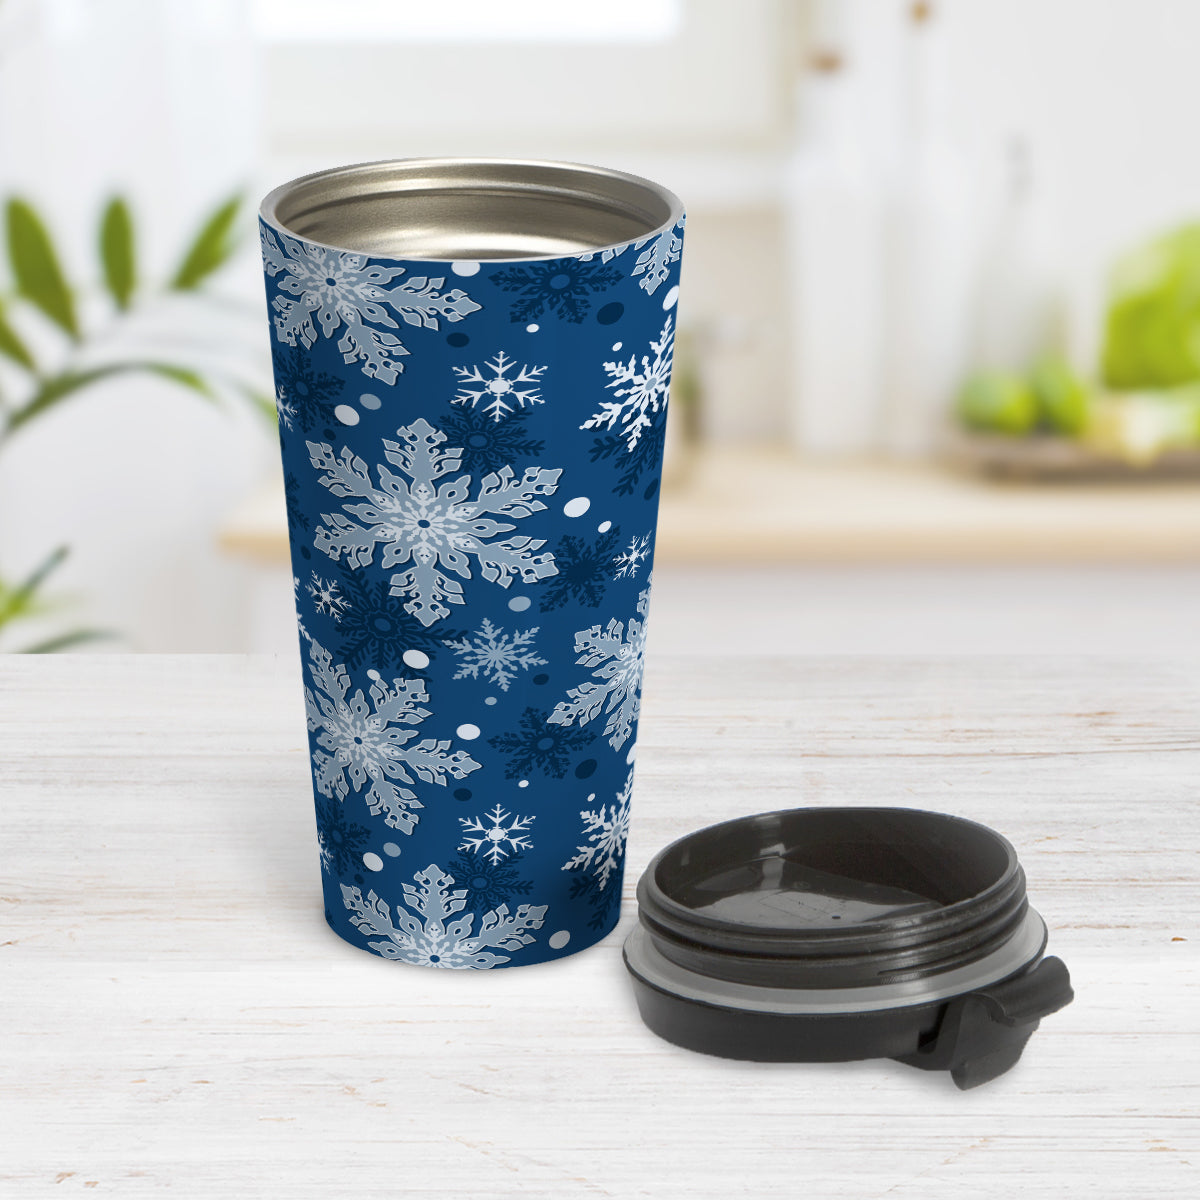 Classic Blue Snowflake Pattern Winter Travel Mug (15oz) at Amy's Coffee Mugs. A stainless steel insulated travel mug designed with a pattern of different shades of blue snowflakes over a classic blue background color that wraps around the travel mug. Photo shows the mug open with the lid on the table beside it.